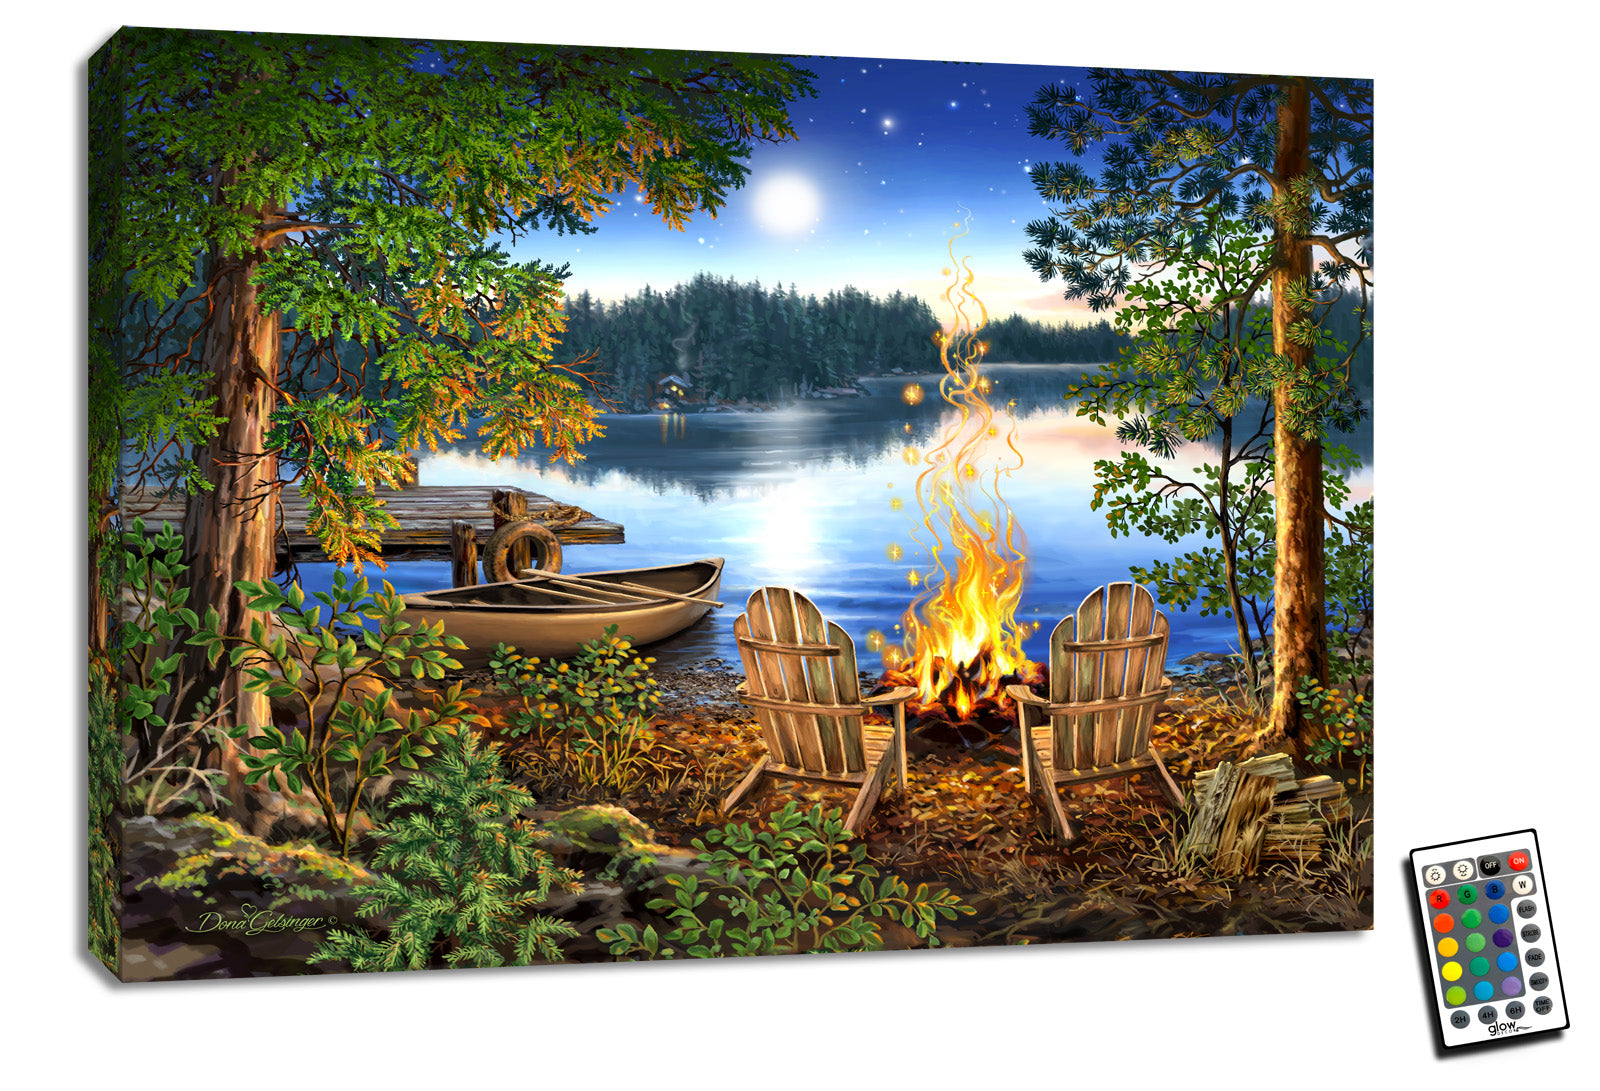 This stunning piece features a serene lakeside scene, complete with a warm and inviting campfire at the water's edge, flanked by Adirondack chairs just waiting for you and your special someone to snuggle up in.  The peaceful dock with a wooden boat gently swaying in the calm waters provides the perfect backdrop to watch the moon's soft glow as it illuminates the night sky. 